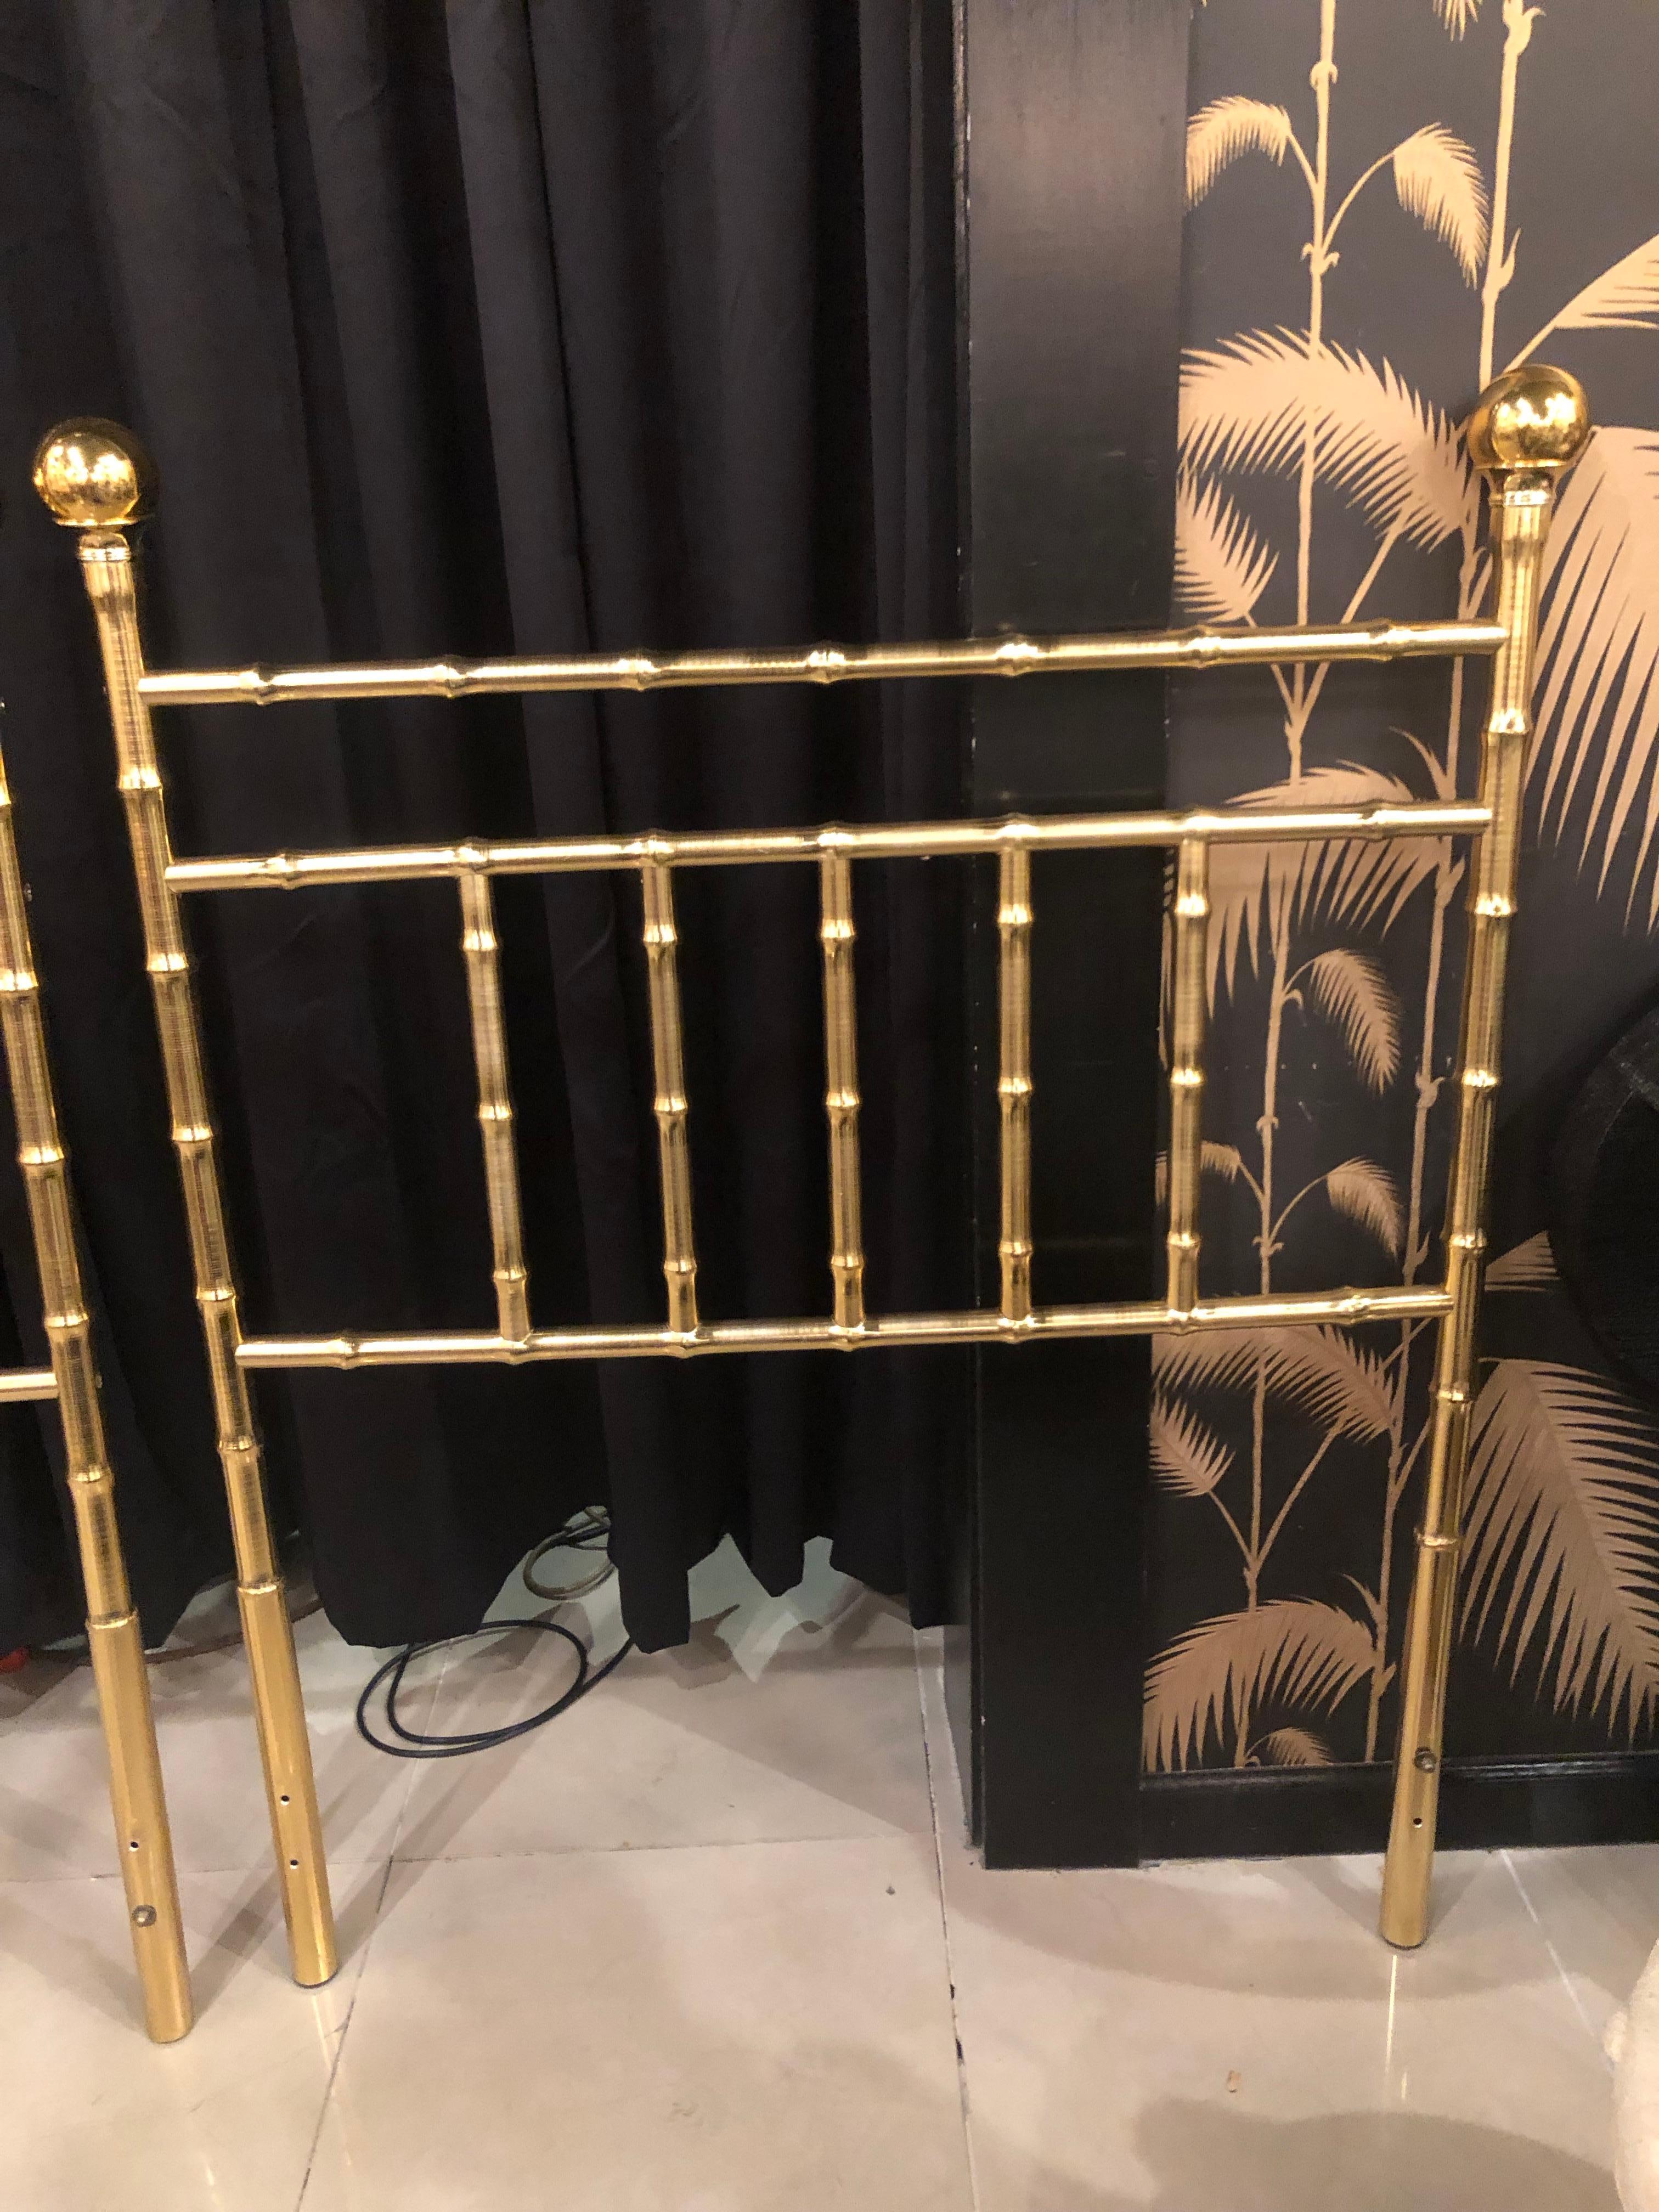 Lovely pair of vintage twin size Hollywood Regency headboards. Faux bamboo brass design. Has a few minor scuffs to the original vintage finish.